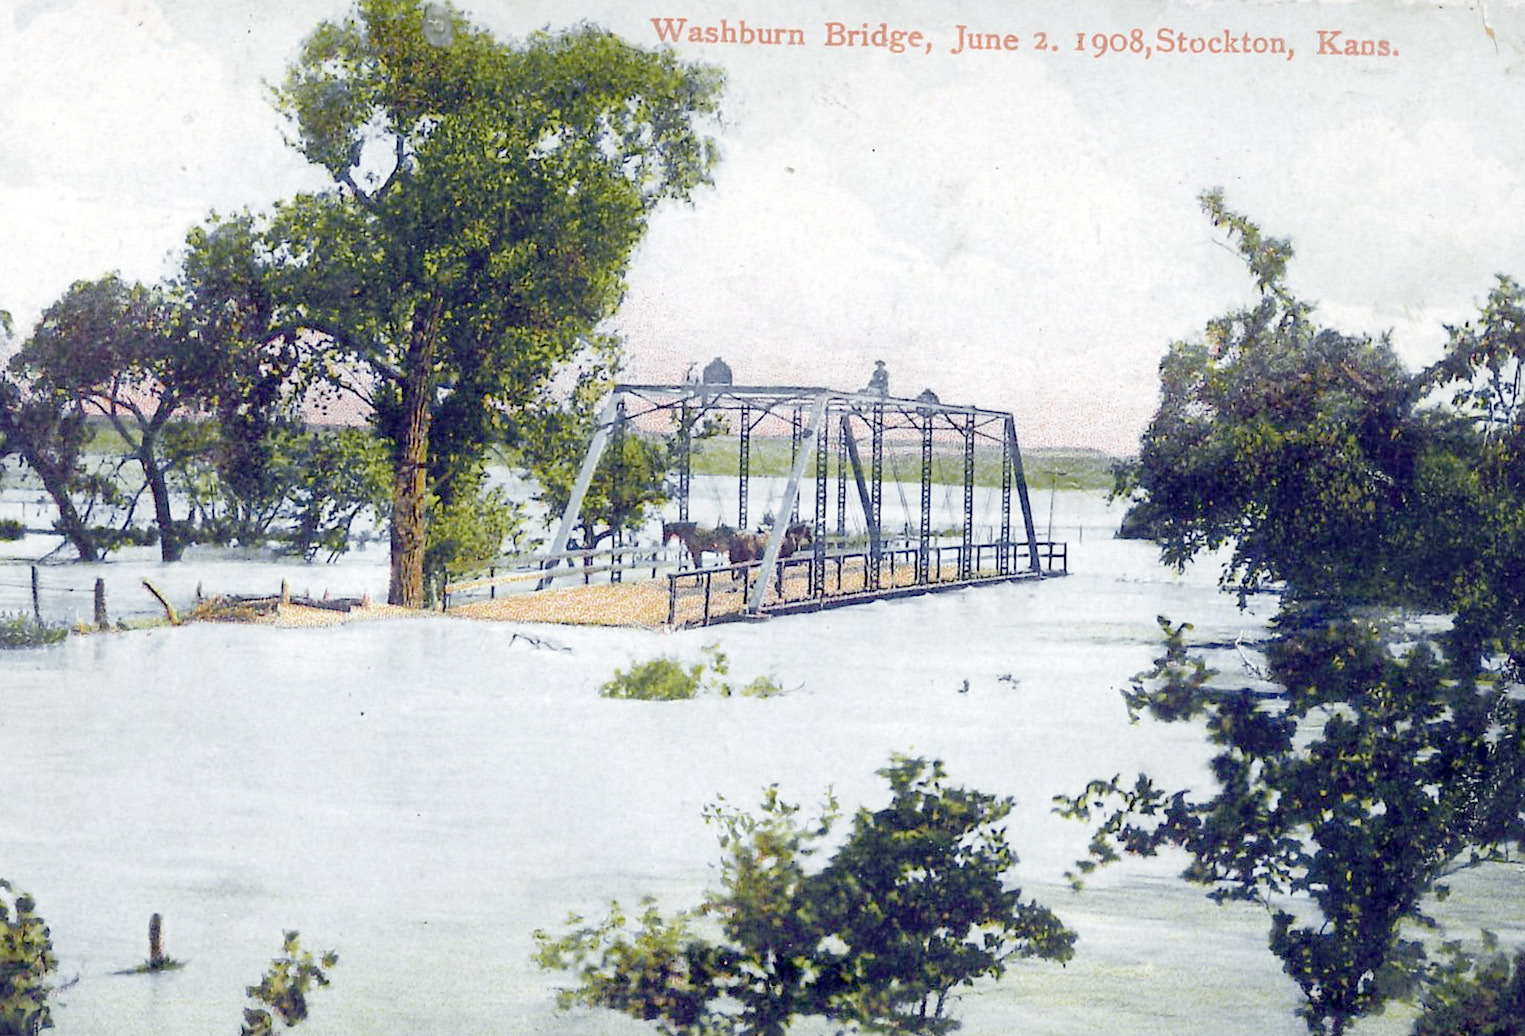 WHILE THE AREA IS STILL WAITING FOR THAT FIRST BIG SPRING THUNDERSTORM OF THE SEASON, here is a Yesteryear picture from June 2nd, 1908, of the Washburn Bridge located approximately one mile east of town. If you look closely, not only is there a horse and wagon on the bridge, but a man sitting on the top of the structure looking out over the flooded area. Lora Belle Sander brought the picture into the Sentinel to share with our readers.